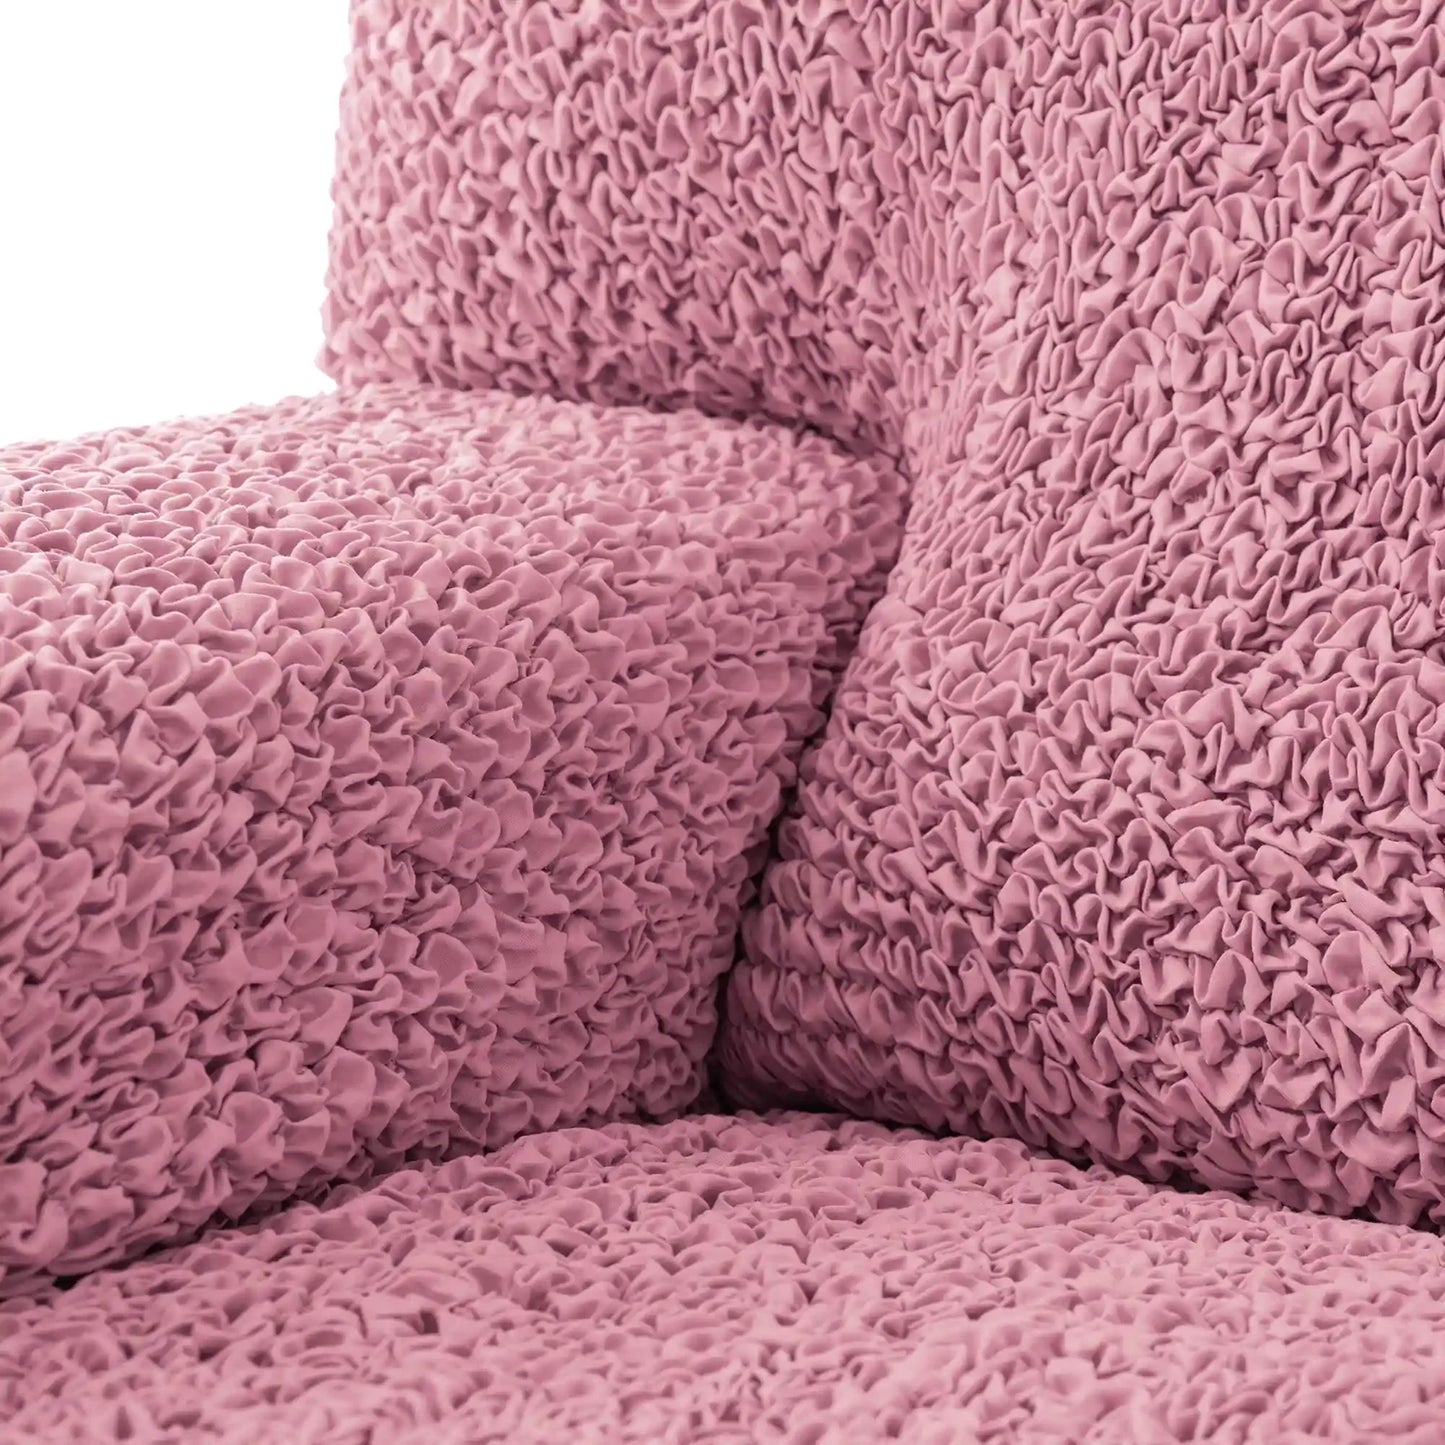 Tube Chair Cover - pink, Microfibra